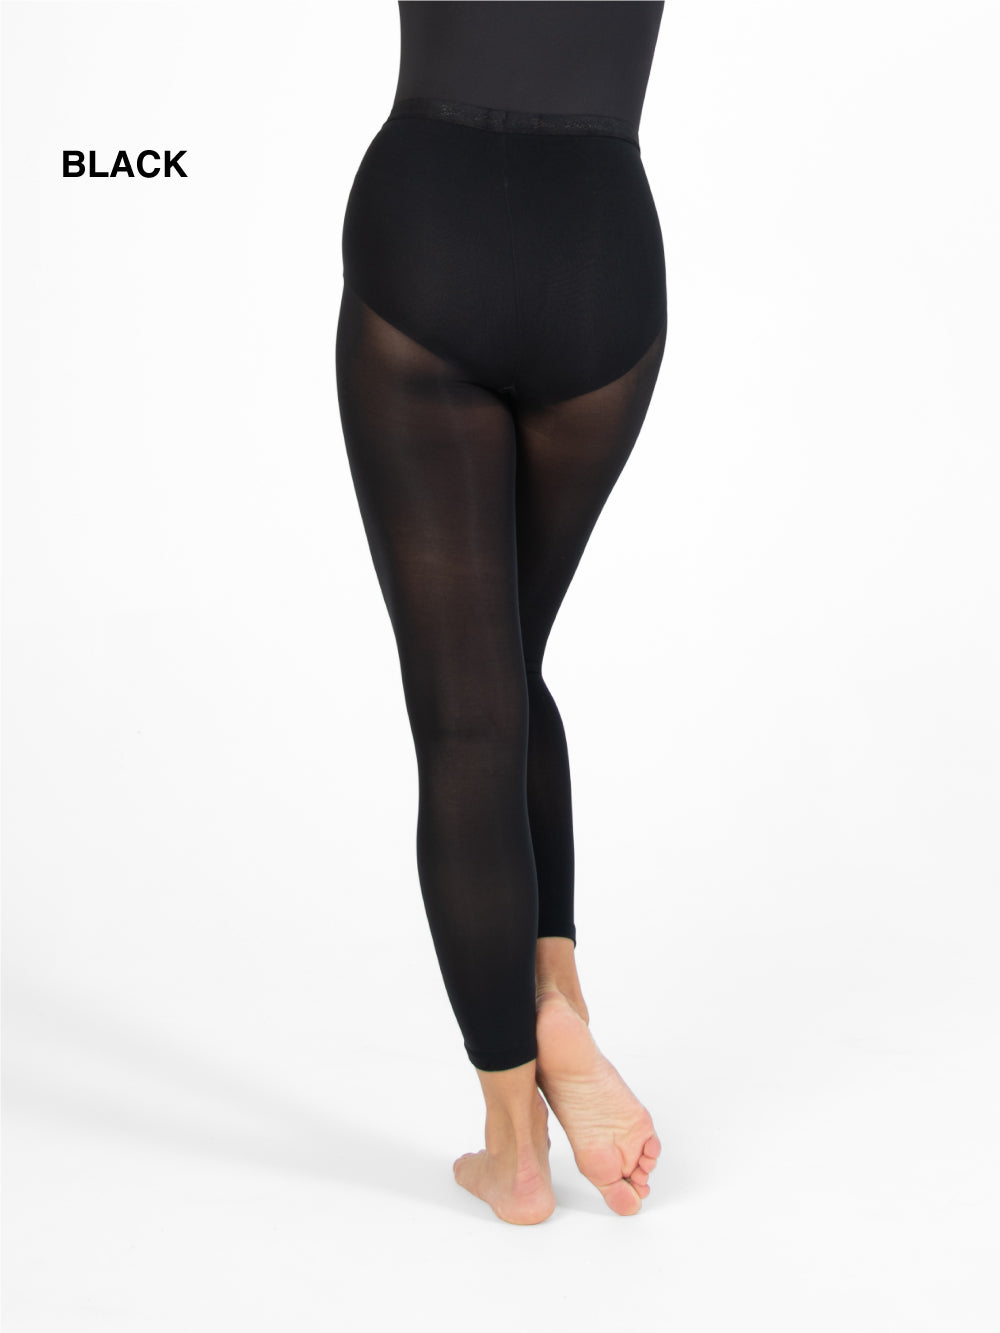 Miss Mikado Girls Footless Tights Sheer to Waist with Lycra and